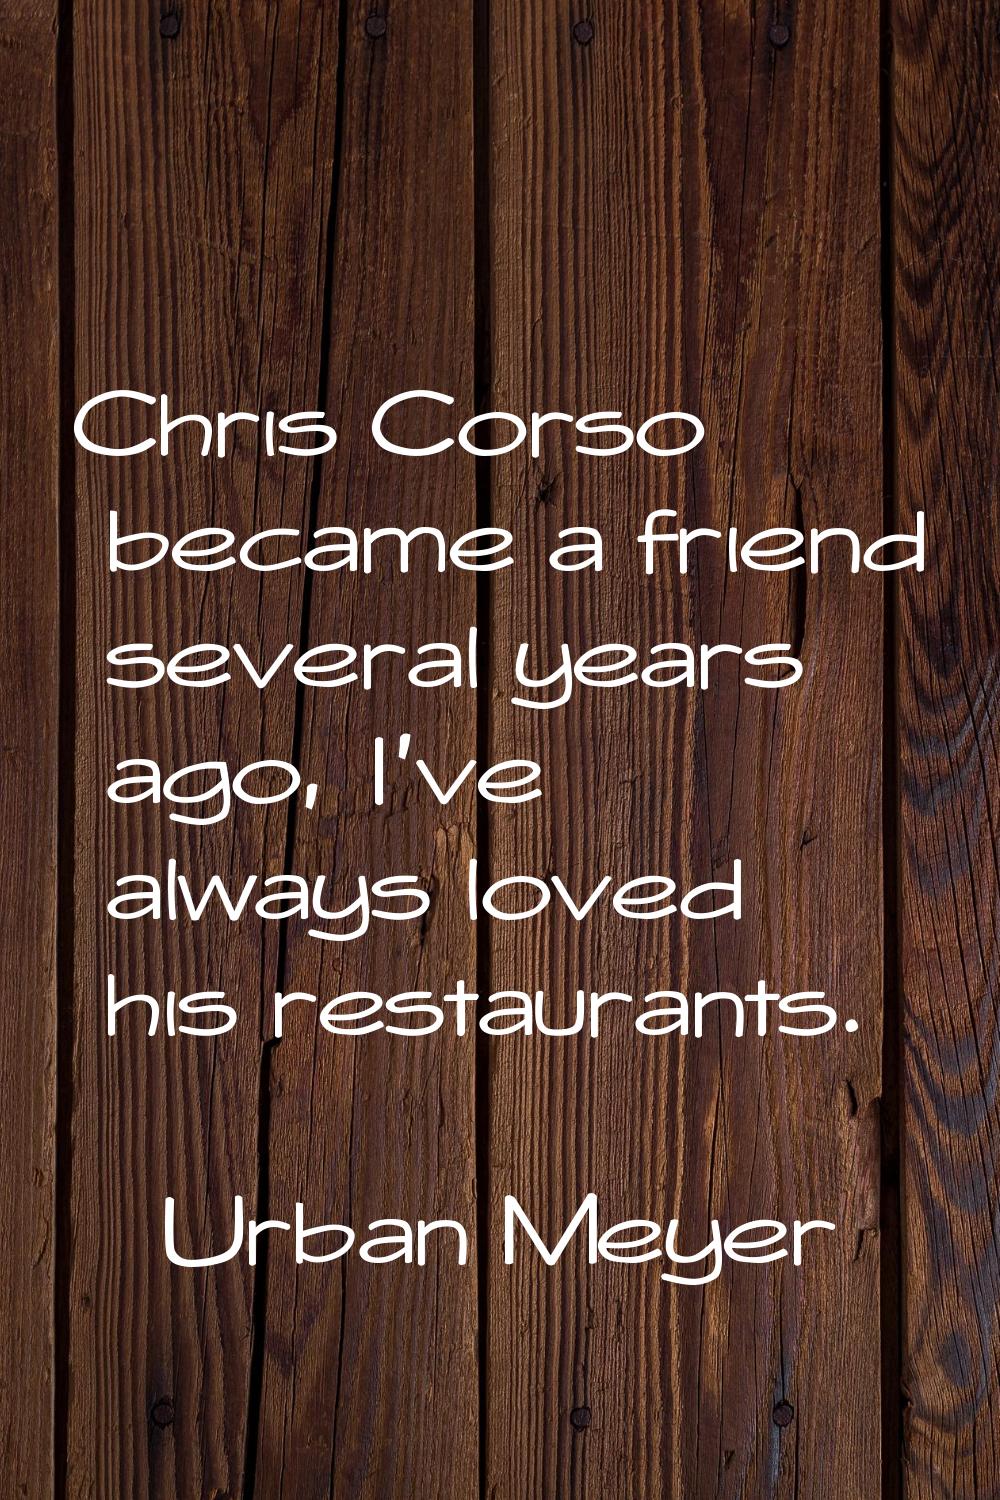 Chris Corso became a friend several years ago, I've always loved his restaurants.